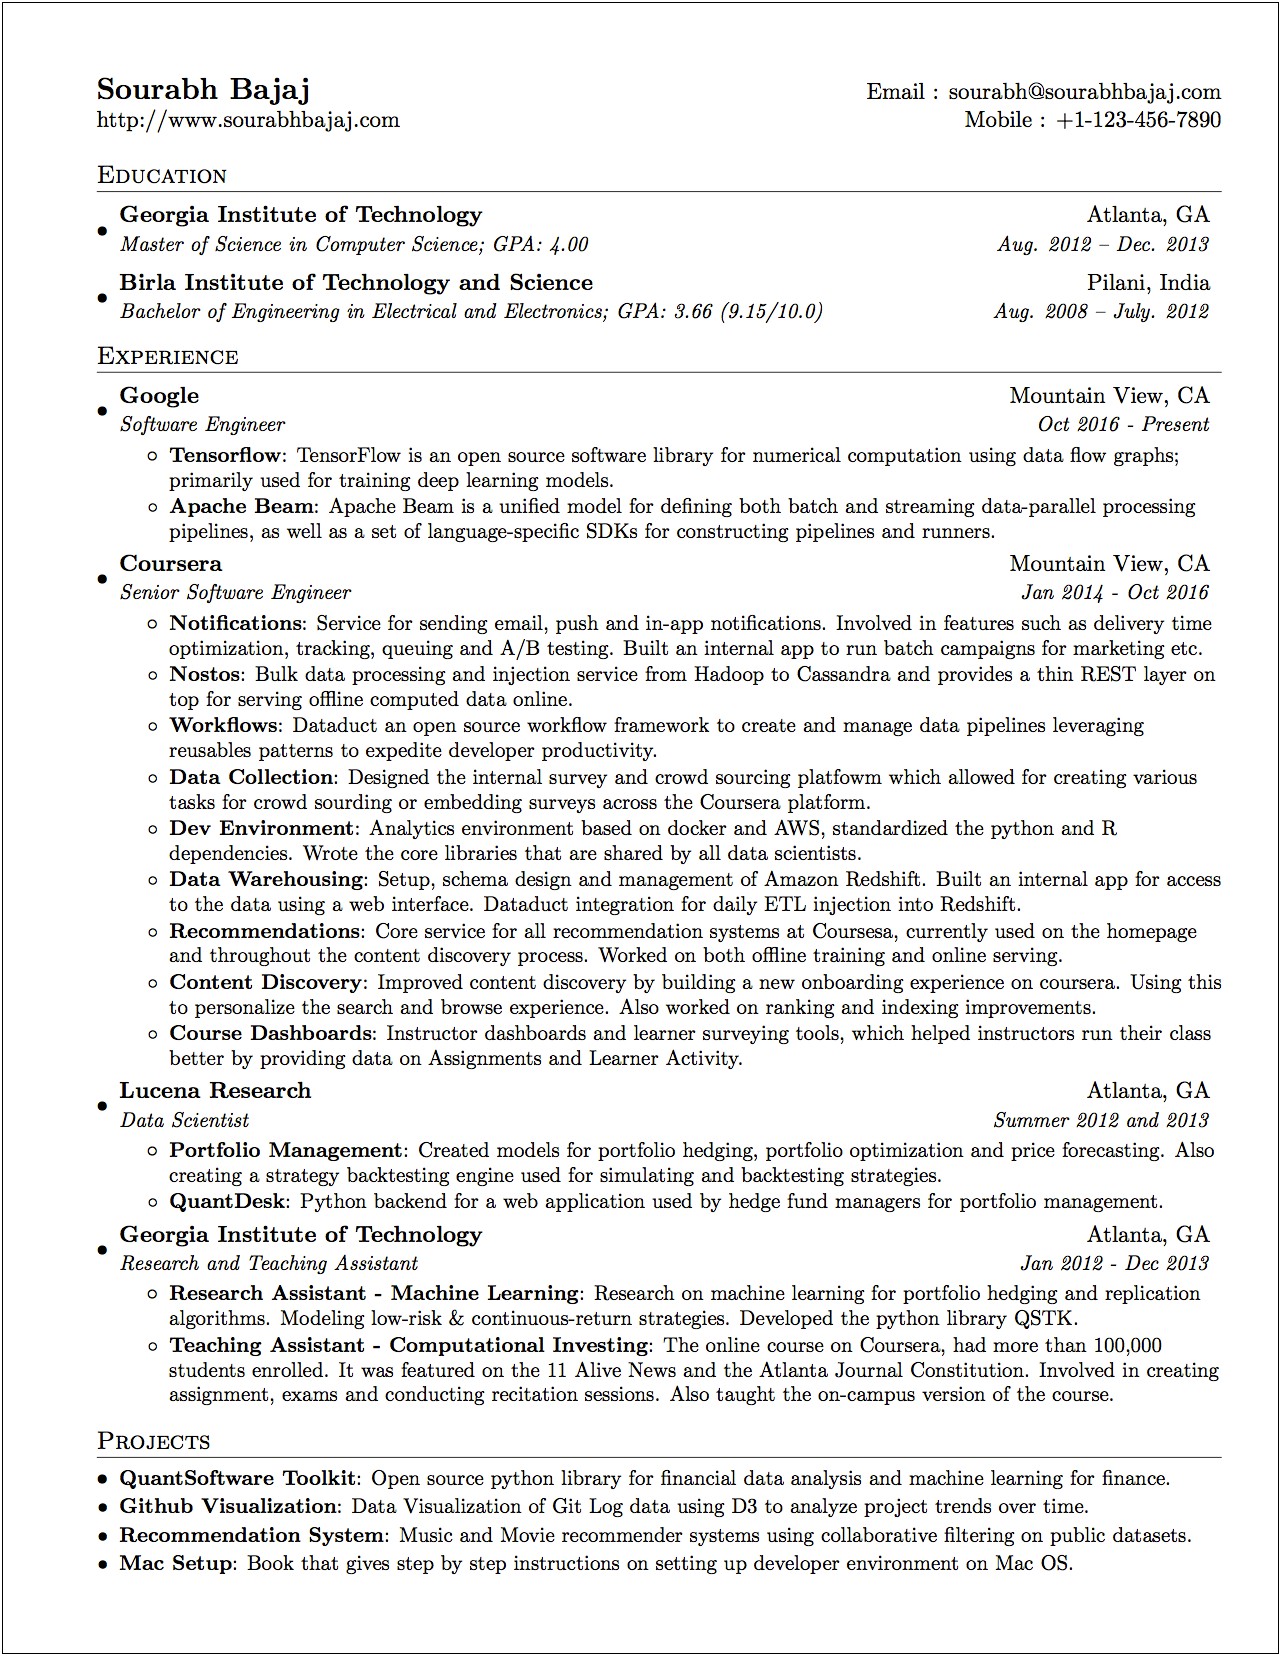 Resume Objective For Data Scientist